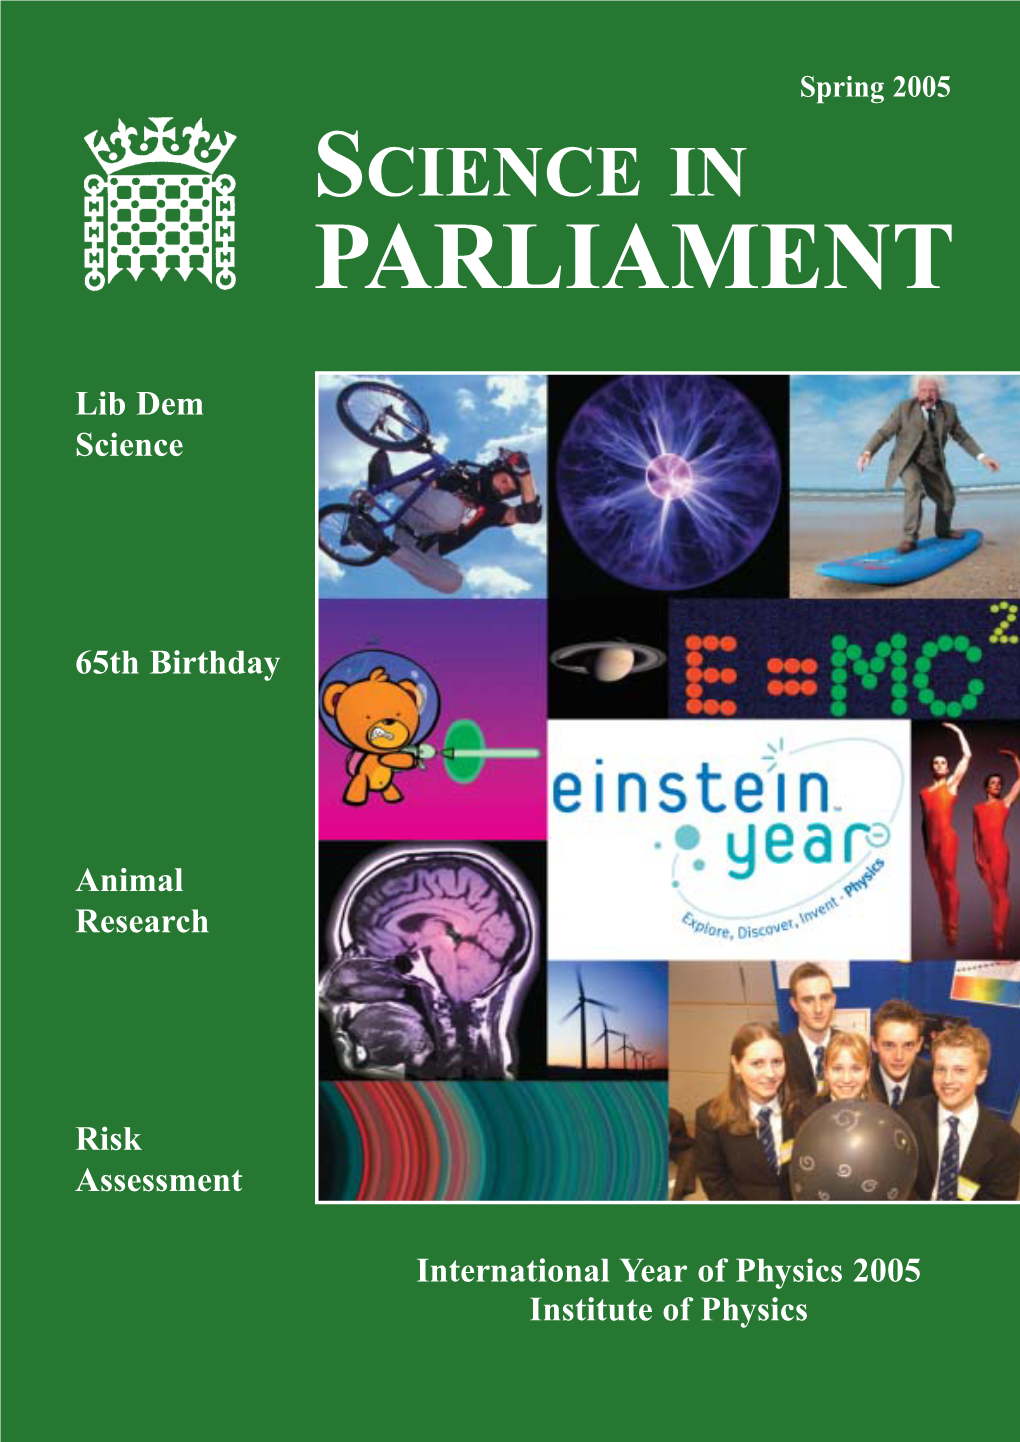 Spring 2005 Spring Parl MAGAZINE Spring 05 8/3/05 9:02 Am Page 1 Page Am 9:02 8/3/05 05 Spring MAGAZINE Parl Parl MAGAZINE Spring 05 8/3/05 9:02 Am Page 2